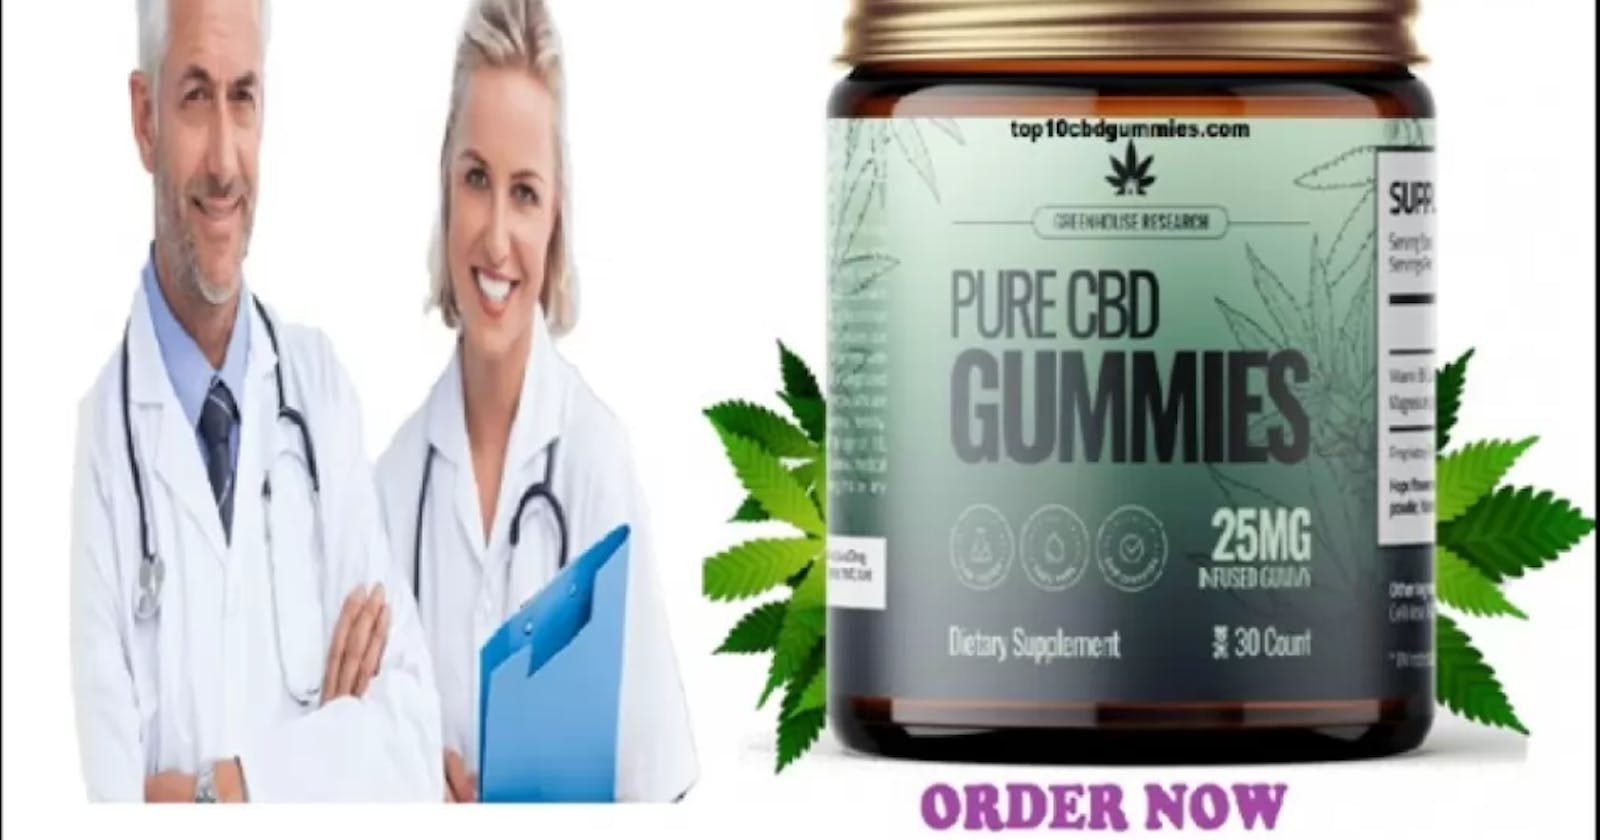 Greenhouse Pure CBD Gummies Reviews, Amazon (Review) Alleviates Anxiety & Depression! Special Offer Today